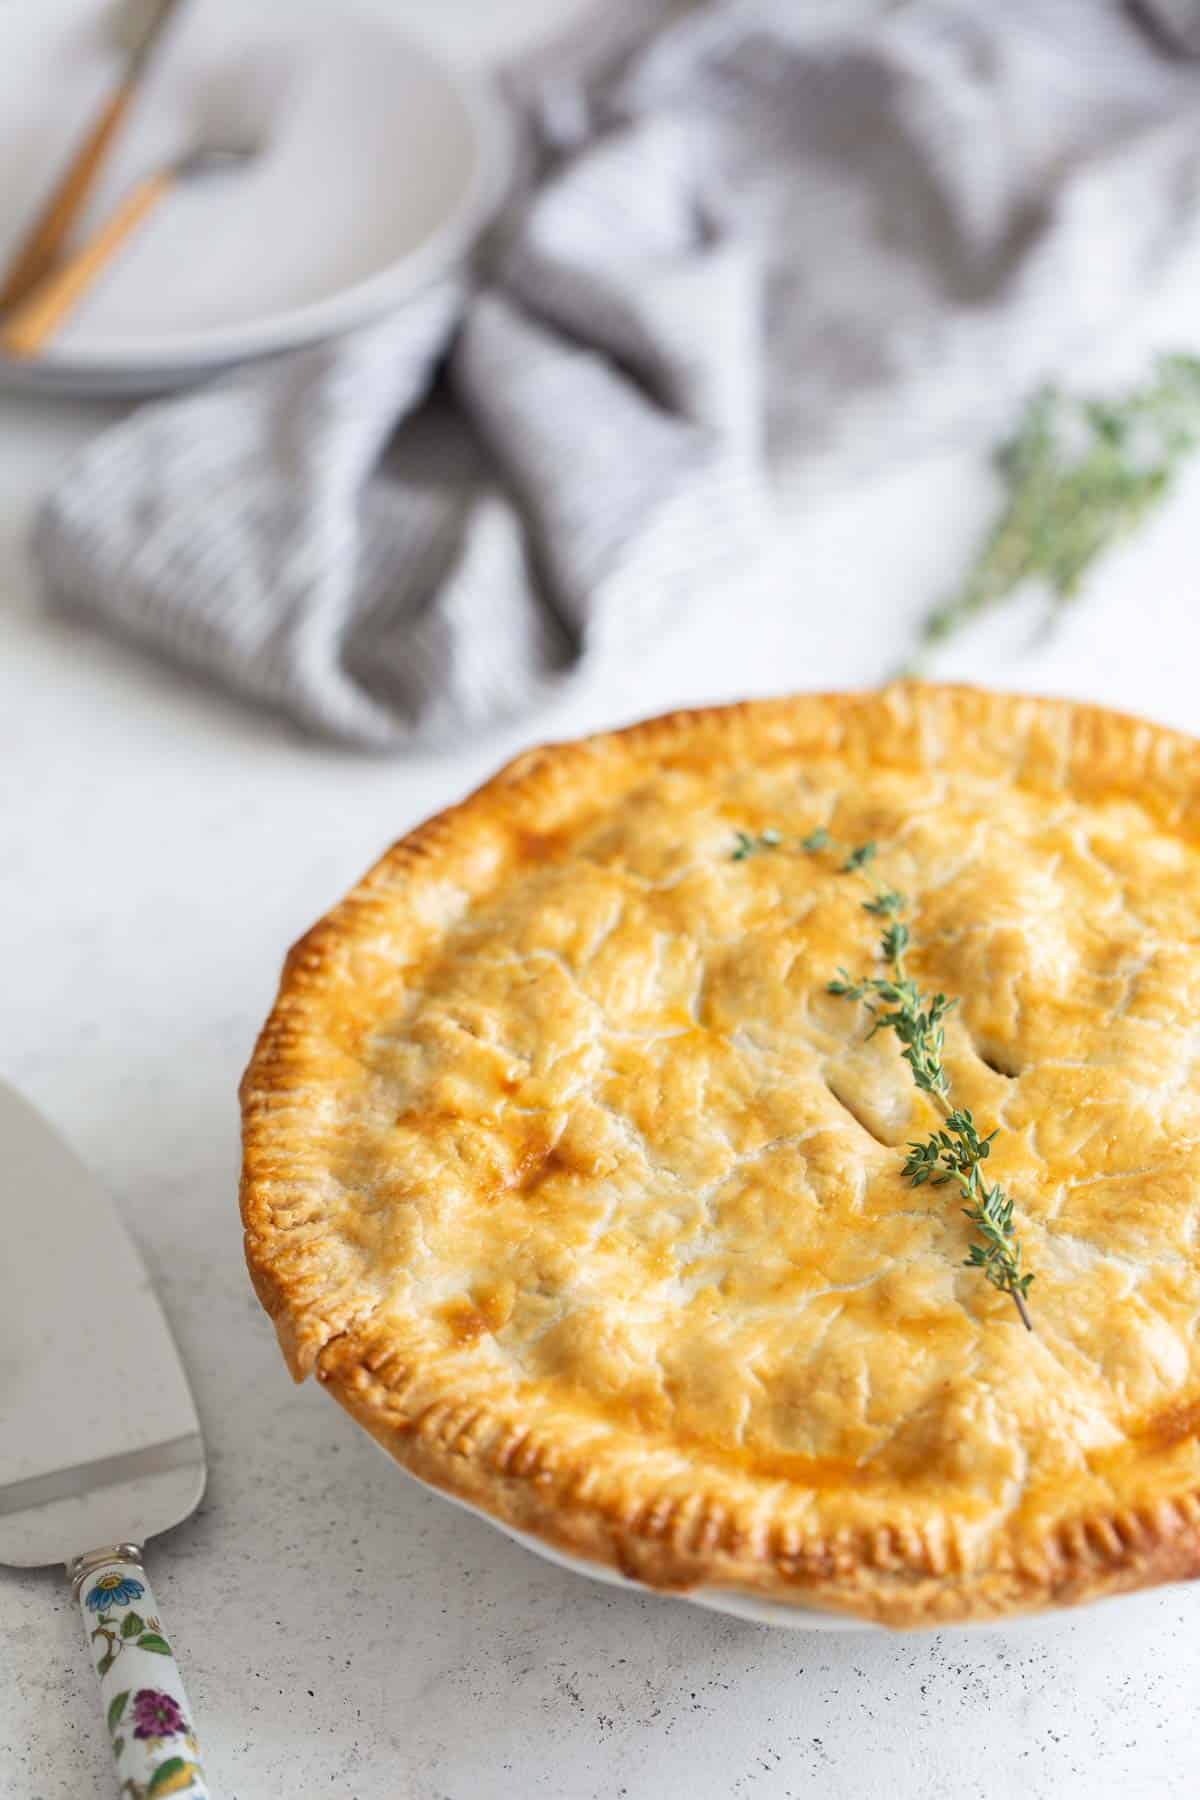 Golden baked pie with a flaky crust and a thyme garnish, served on a white dish with cutlery and a napkin on a light background.